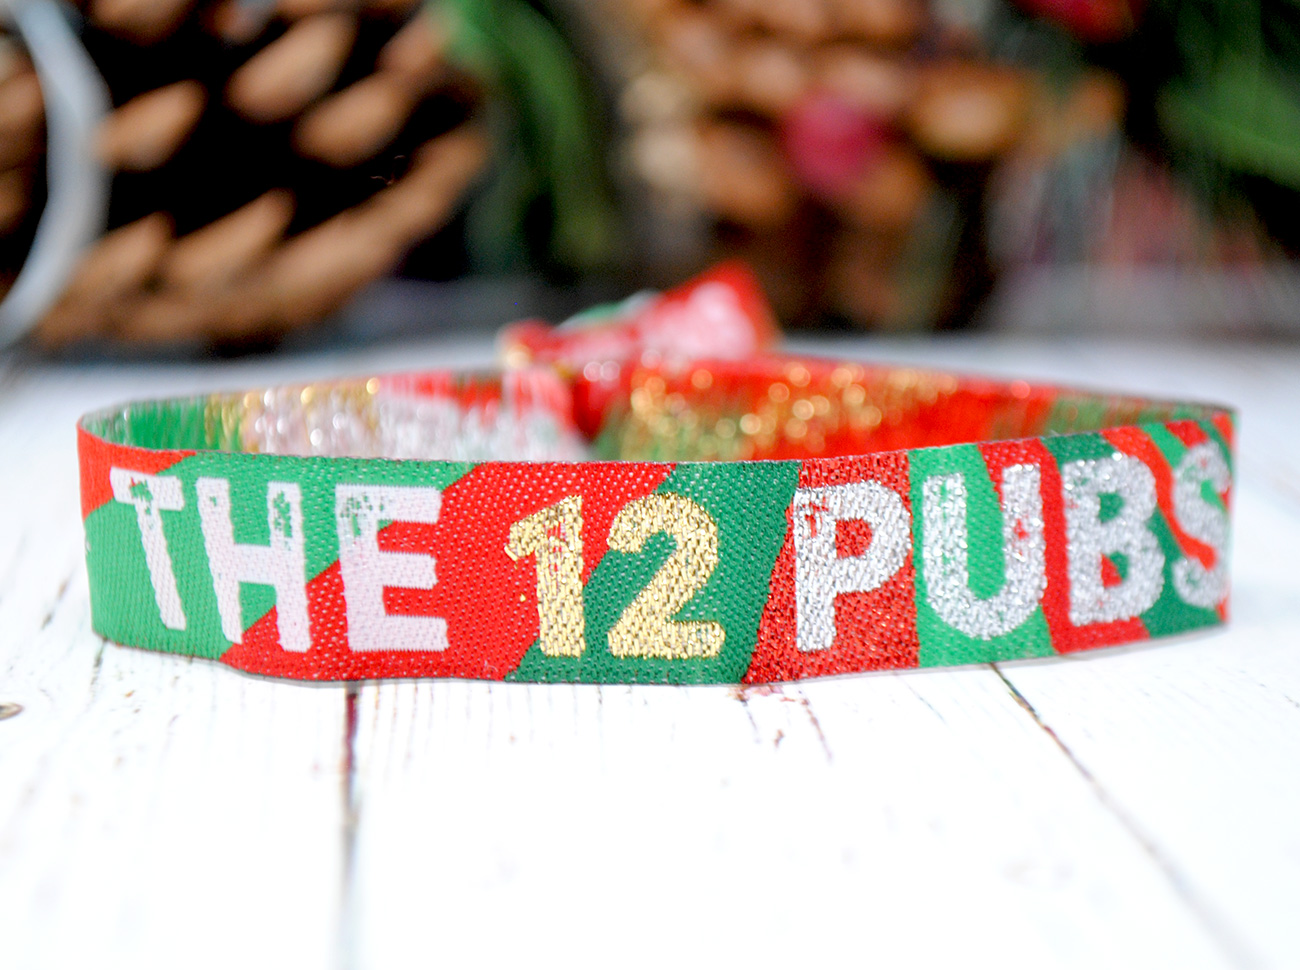 THE 12 PUBS christmas pub crawl party wristbands